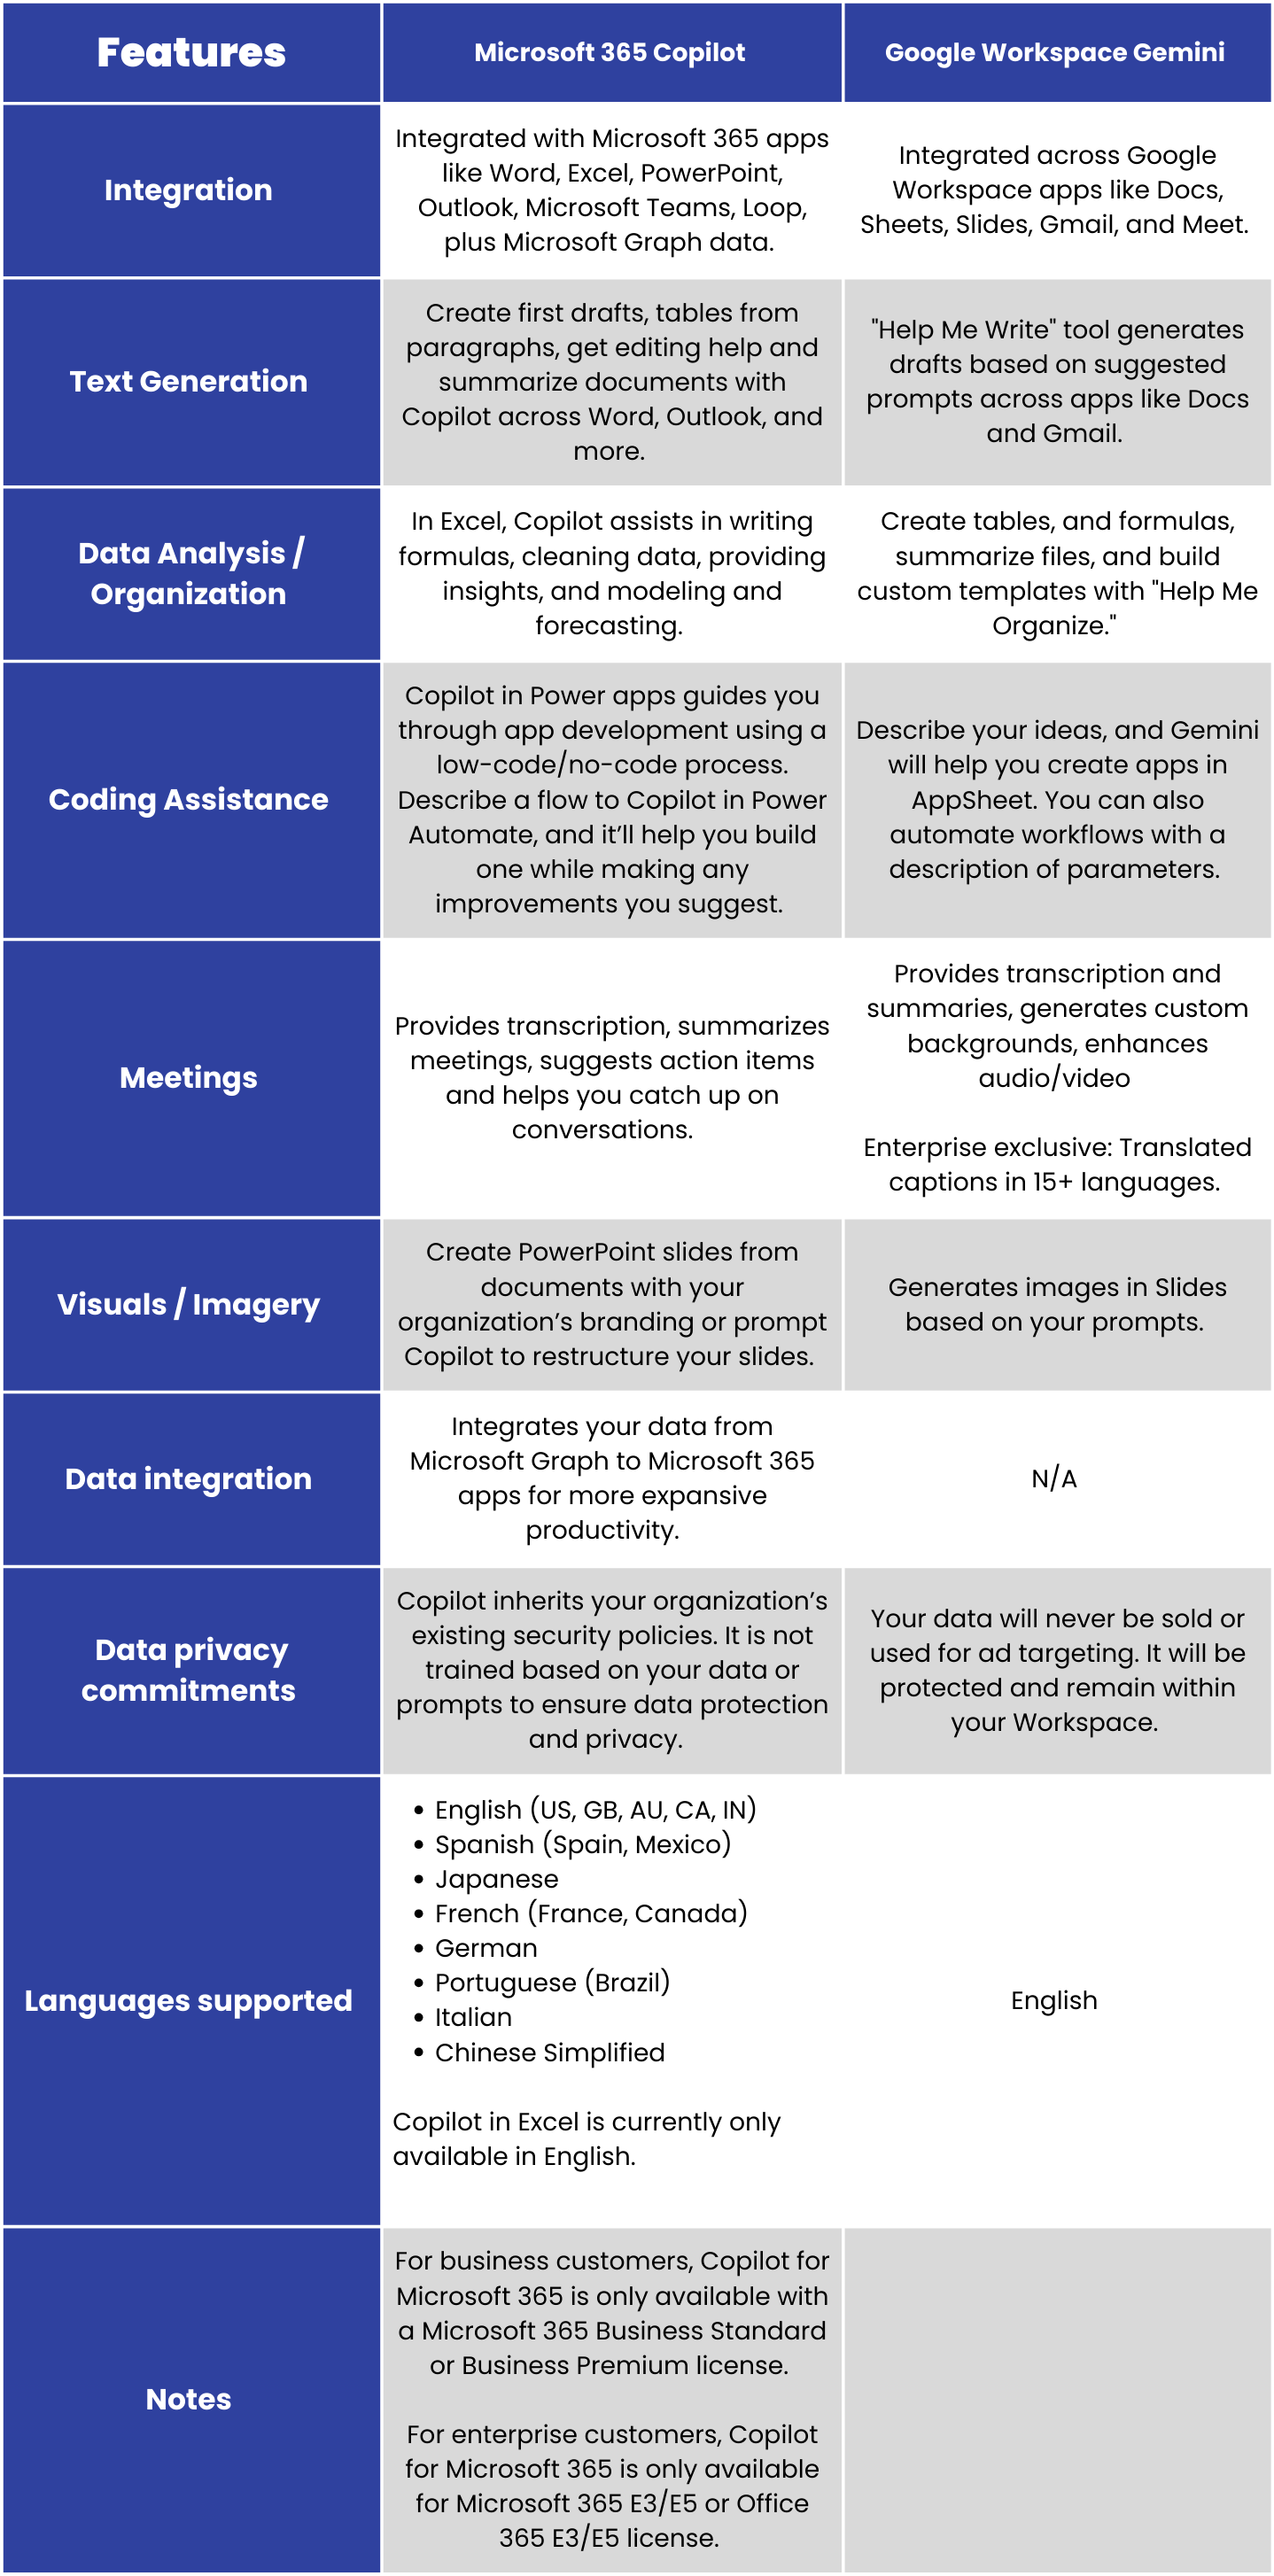 A detailed comparison table highlighting the features of Microsoft 365 Copilot and Google Workspace Gemini. The table covers aspects such as integration, text generation, data analysis/organization, coding assistance, meetings, visuals/imagery, data integration, data privacy commitments, supported languages, and additional notes. It provides valuable insights into the offerings of both platforms.